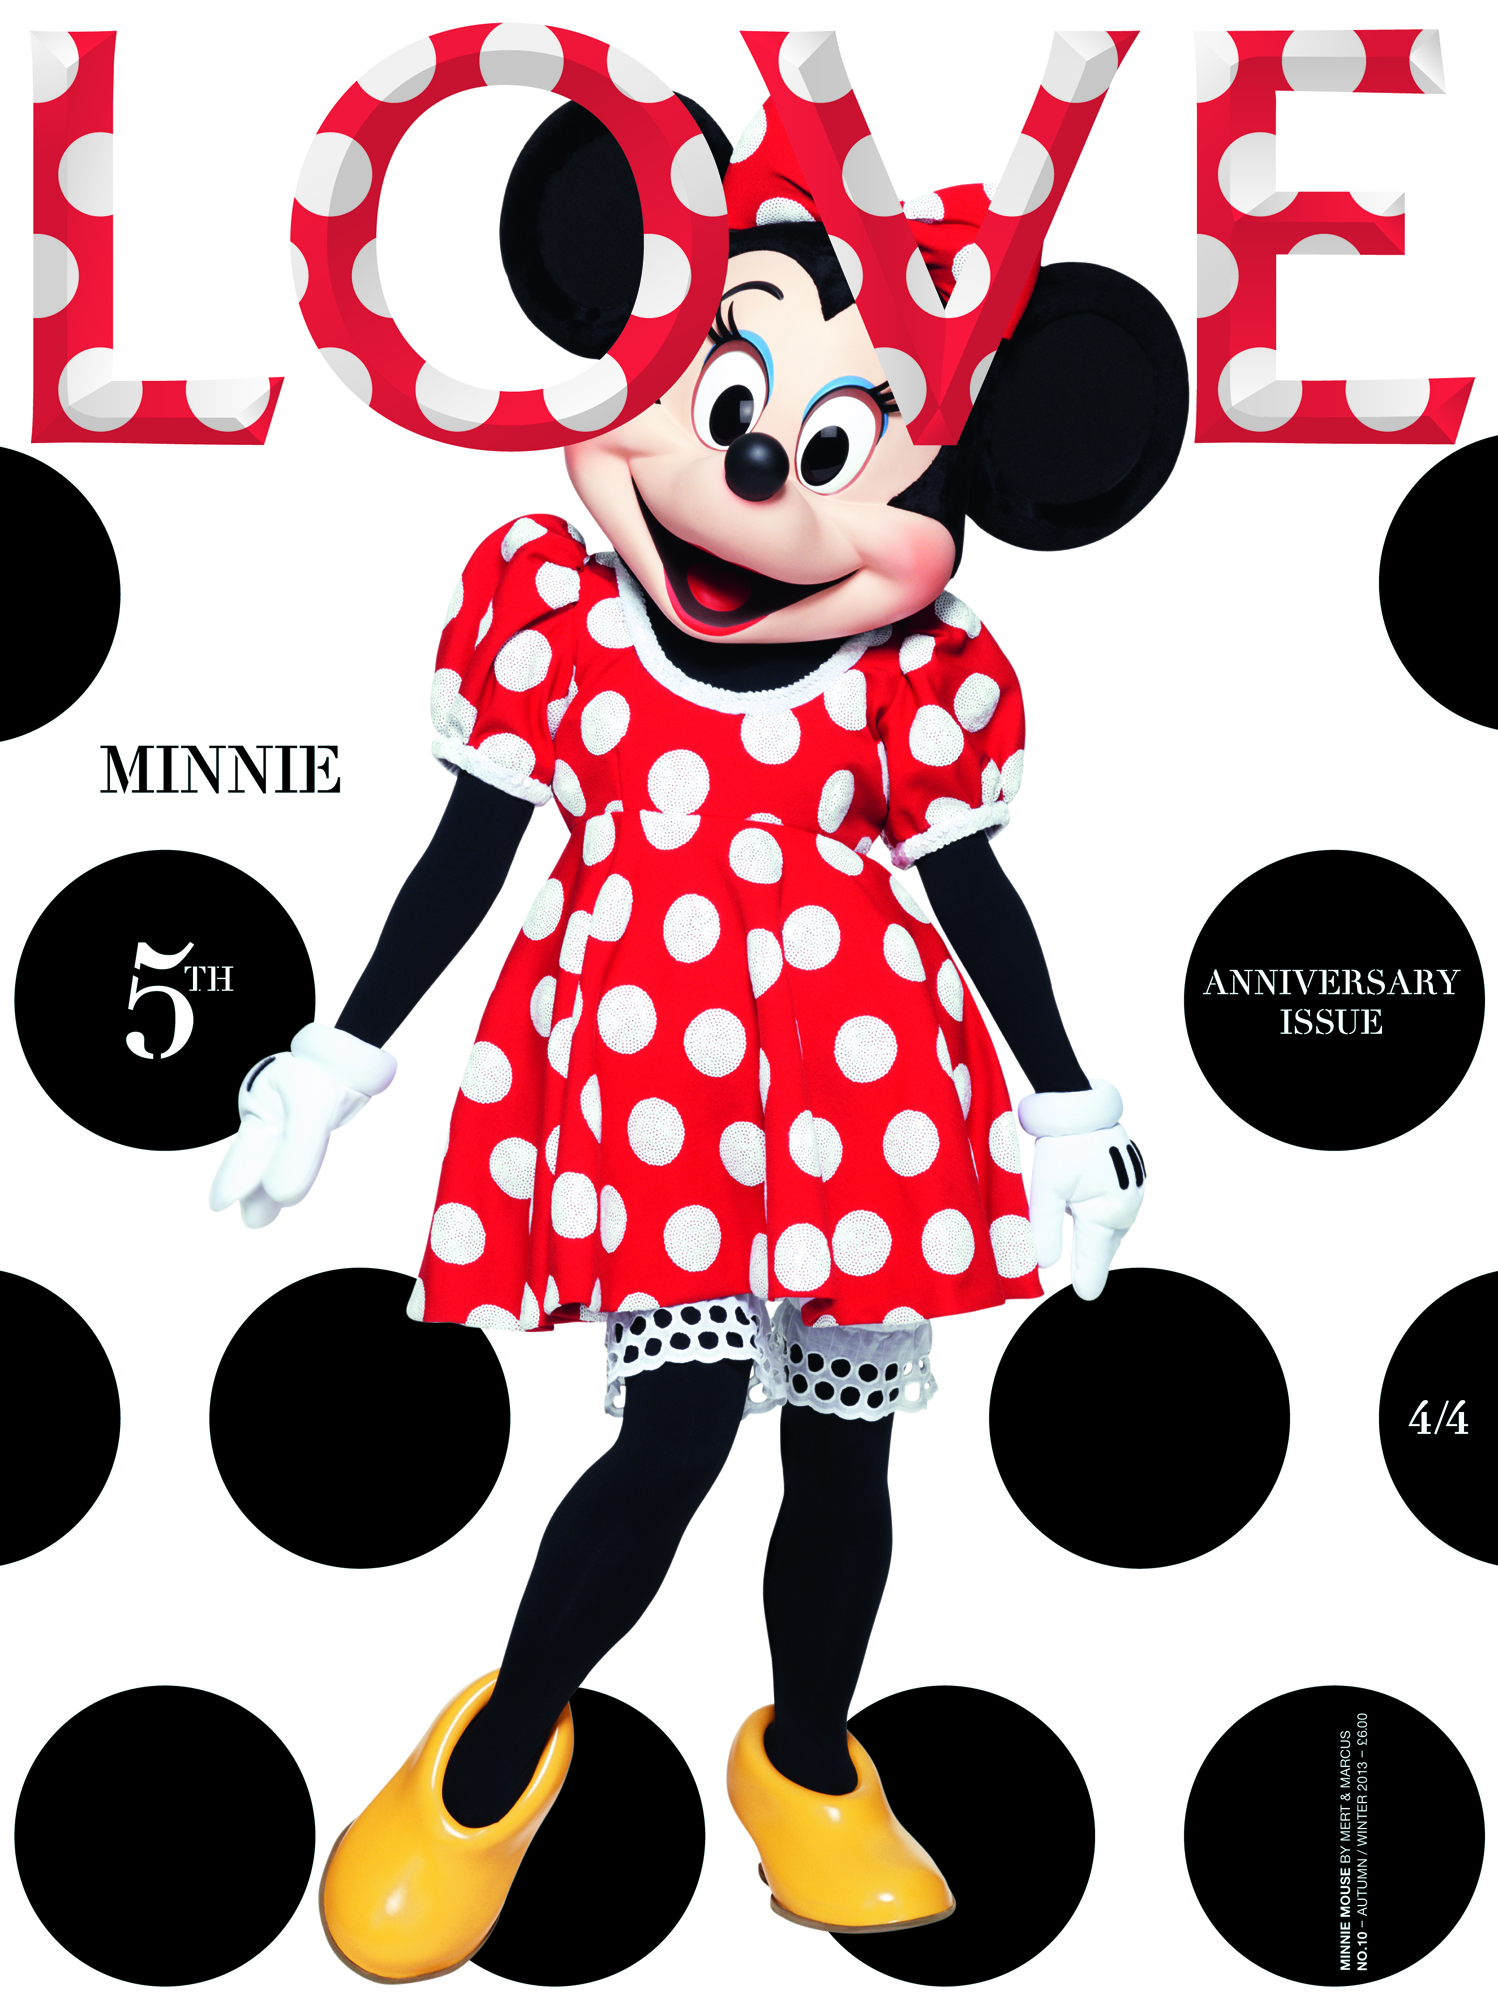 LOVE 10 Minnie Mouse Cover